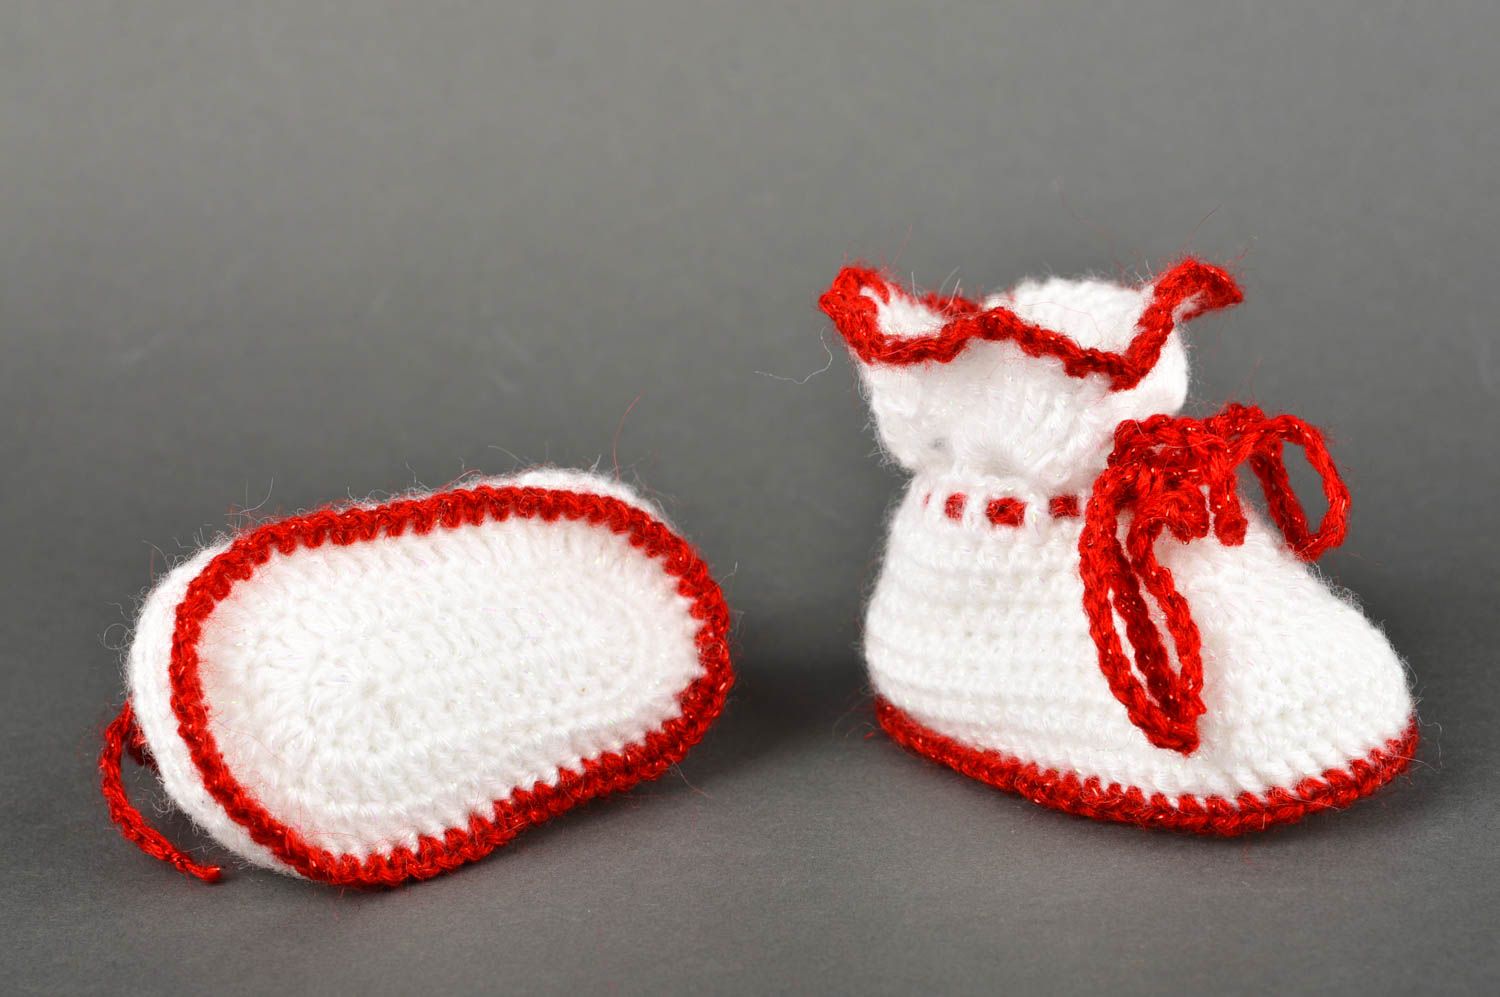 Handmade crochet baby booties crochet ideas baby accessories gifts for kids photo 5